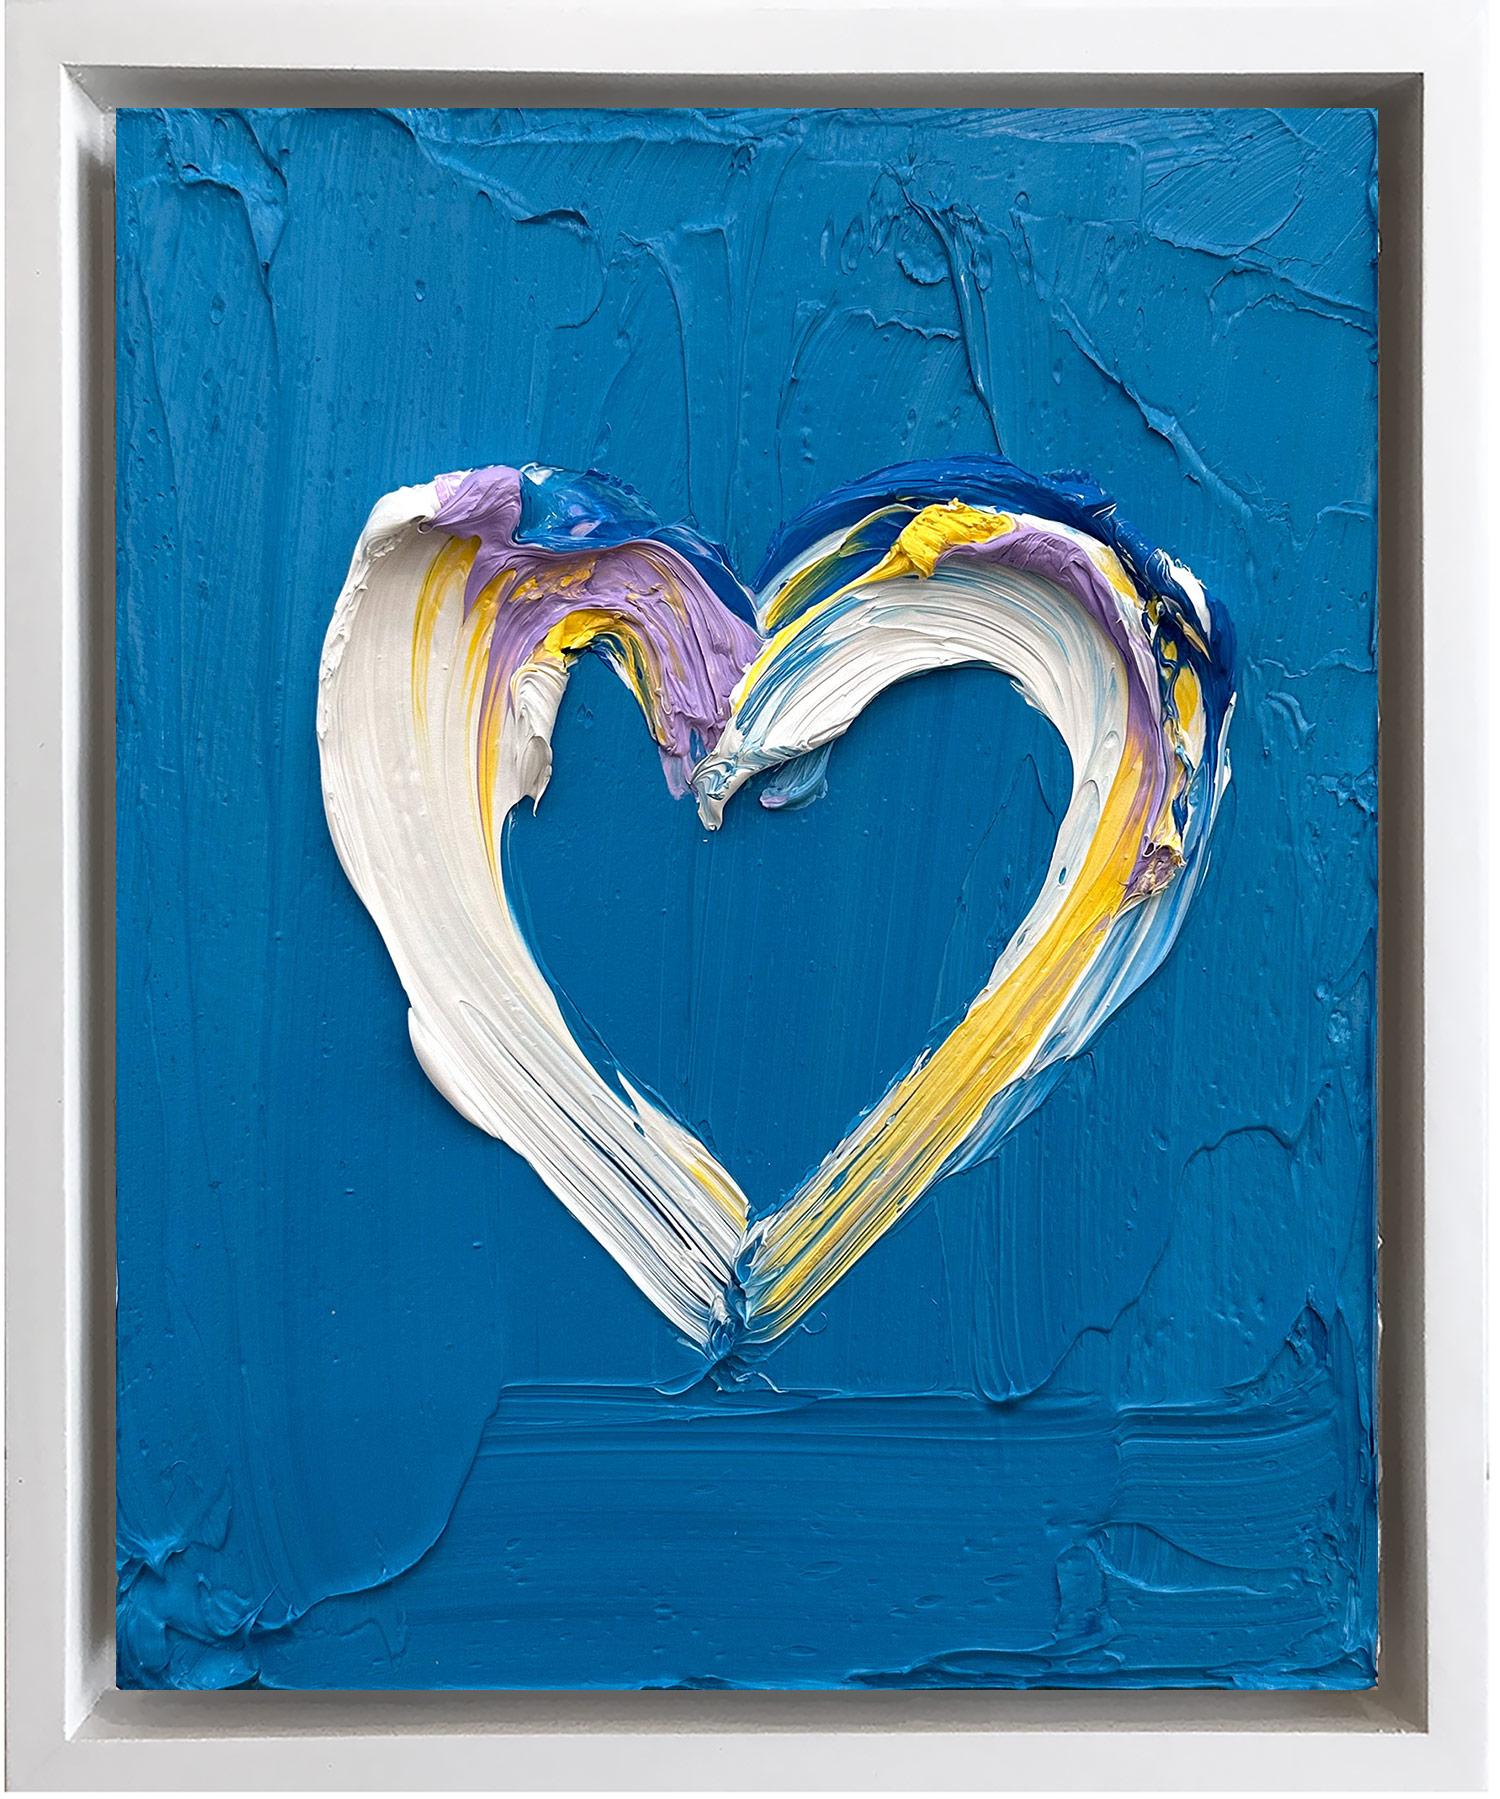 Cindy Shaoul Abstract Painting - "My Playful Heart" Contemporary Oil Painting on Wood White Floater Frame